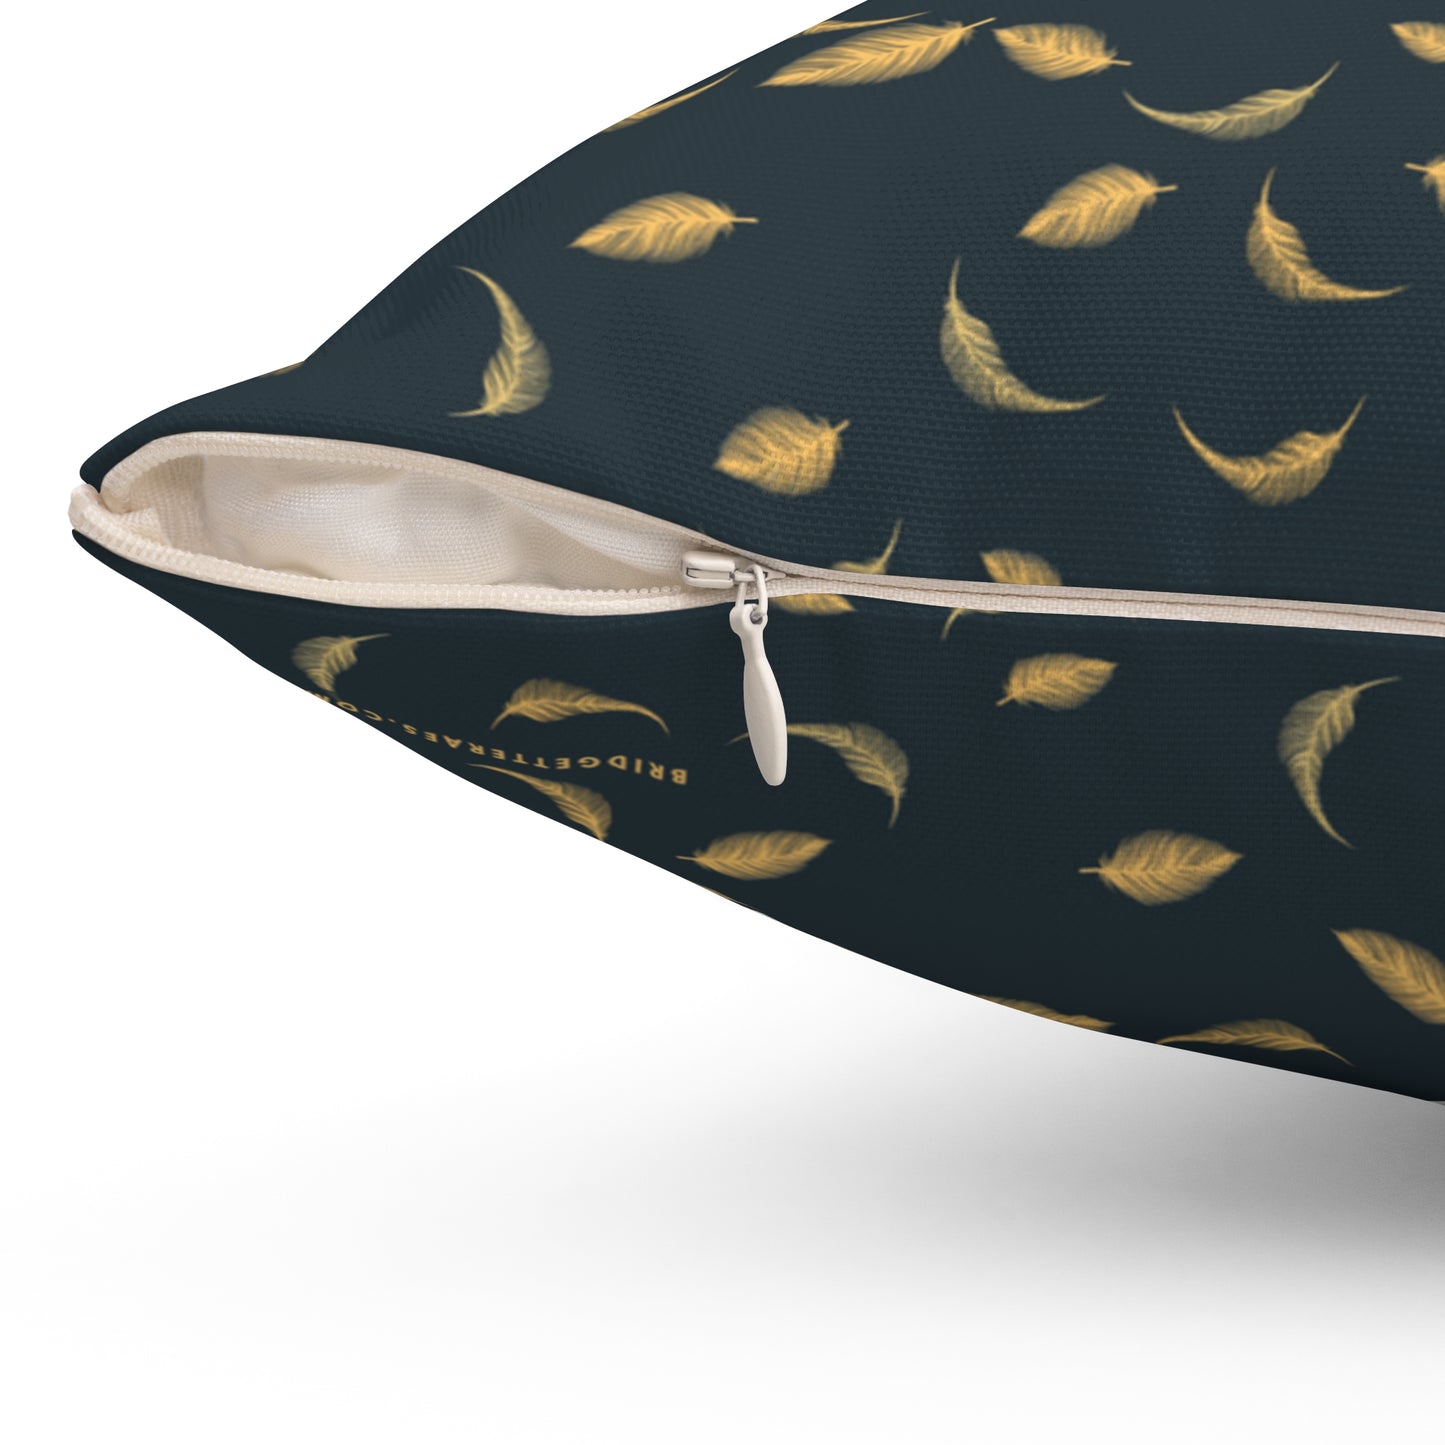 Gold Cascading Feathers Pillow Case